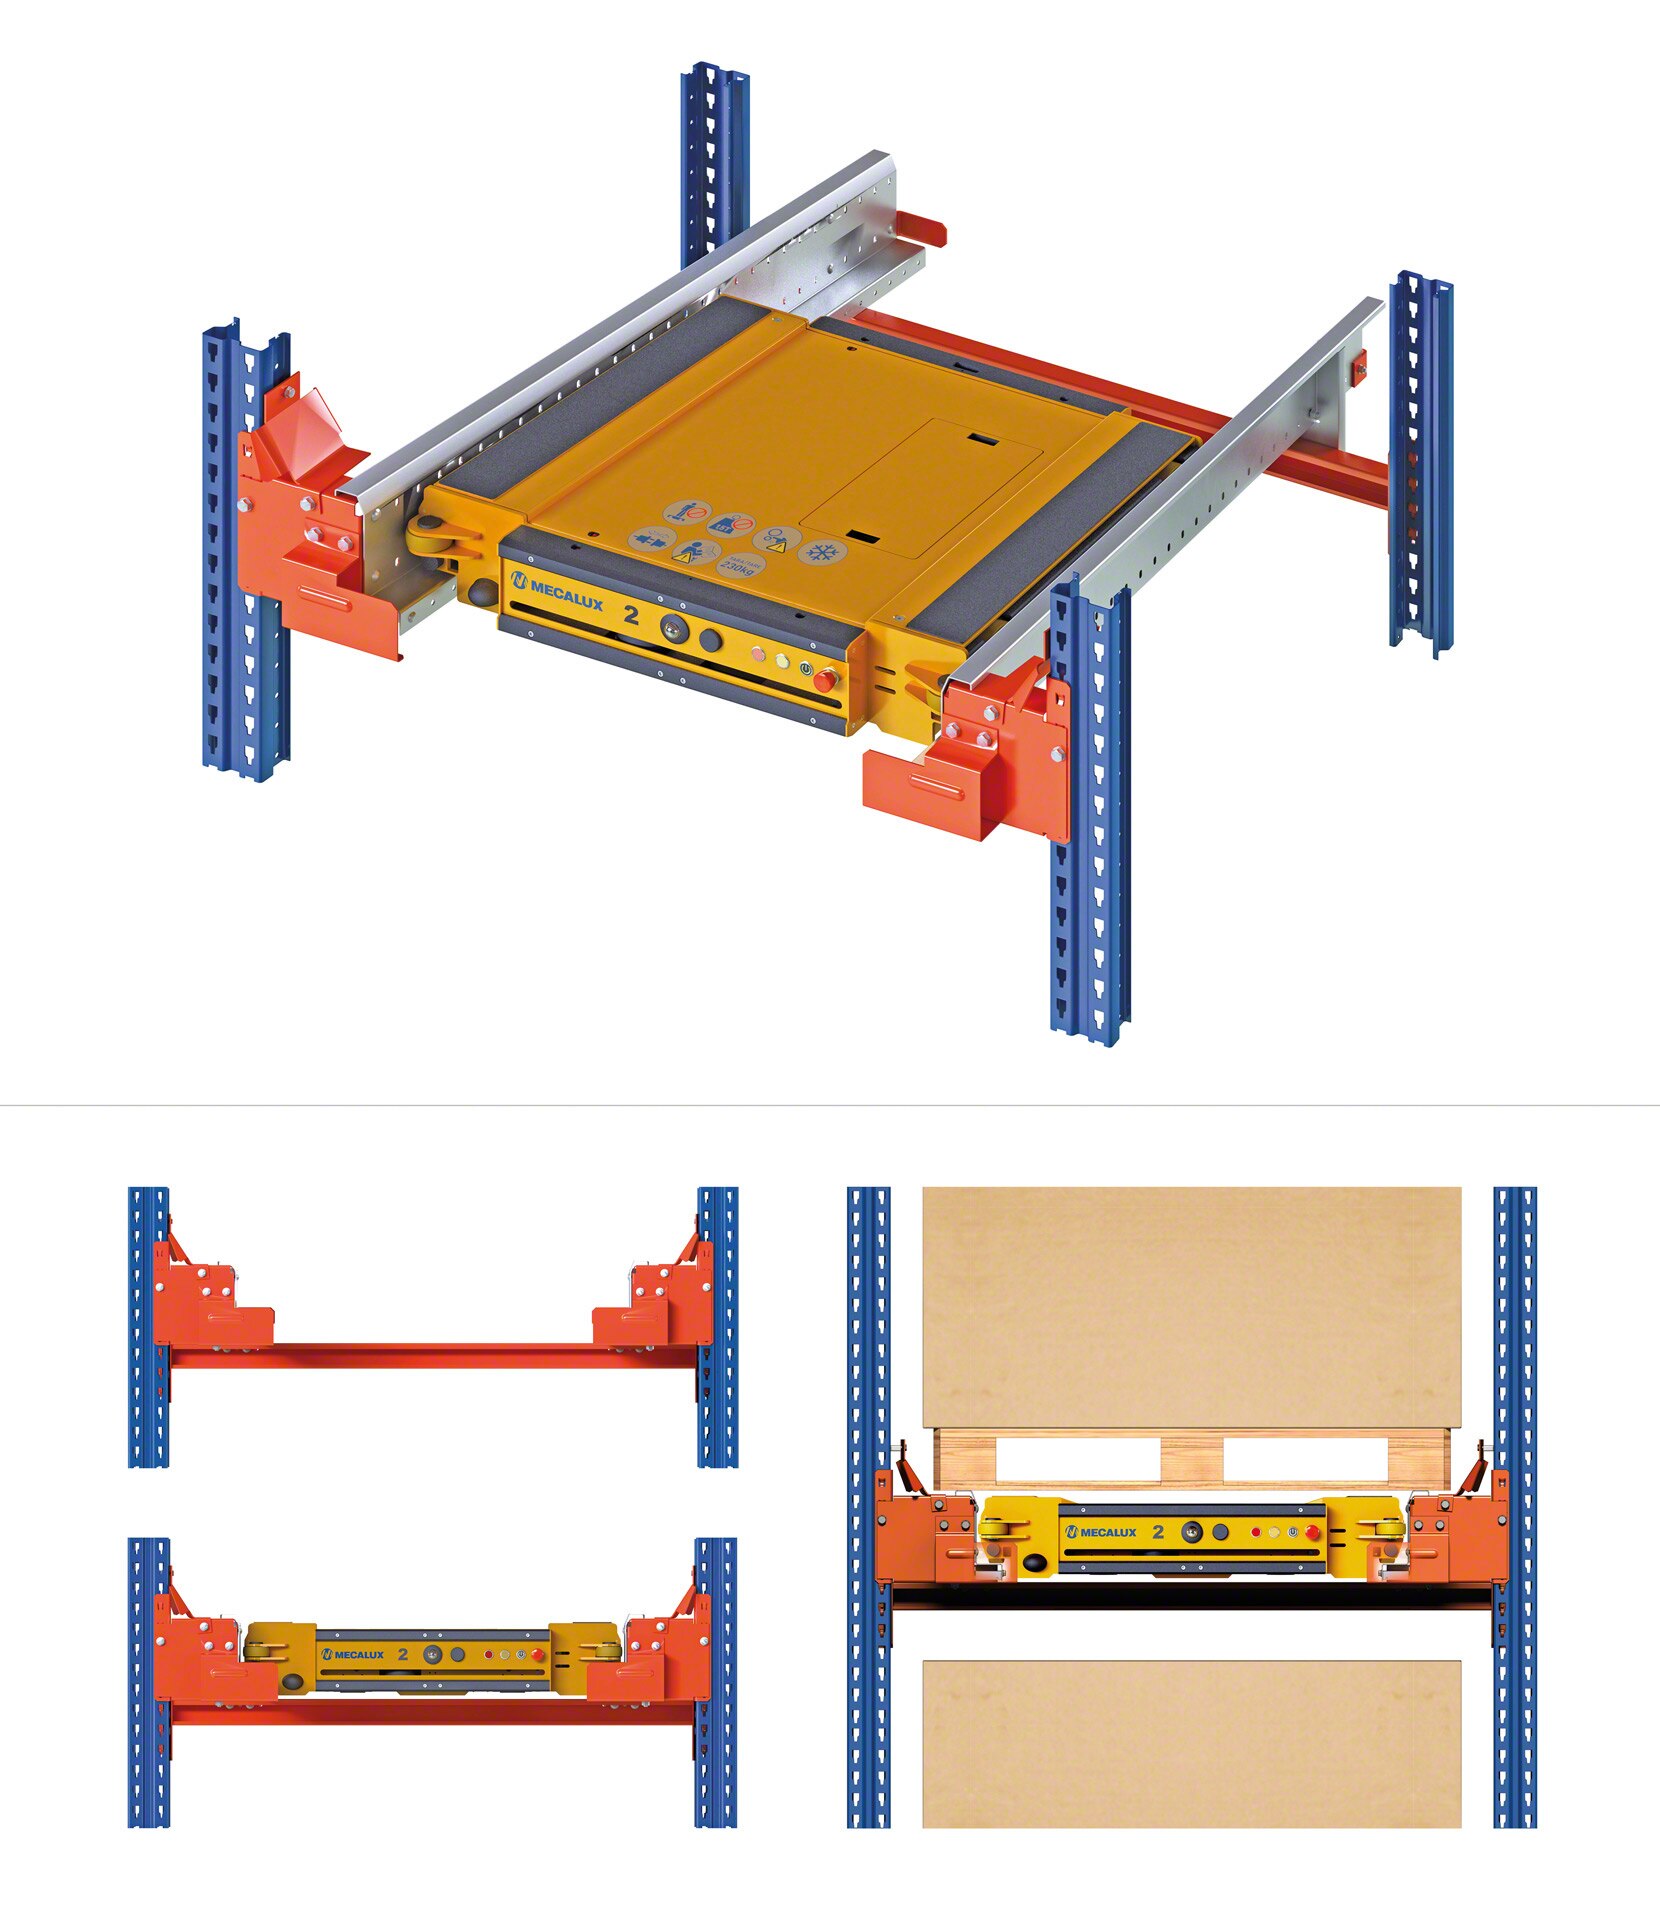 The racks structure must be adapted so that the electric shuttle can operate safely